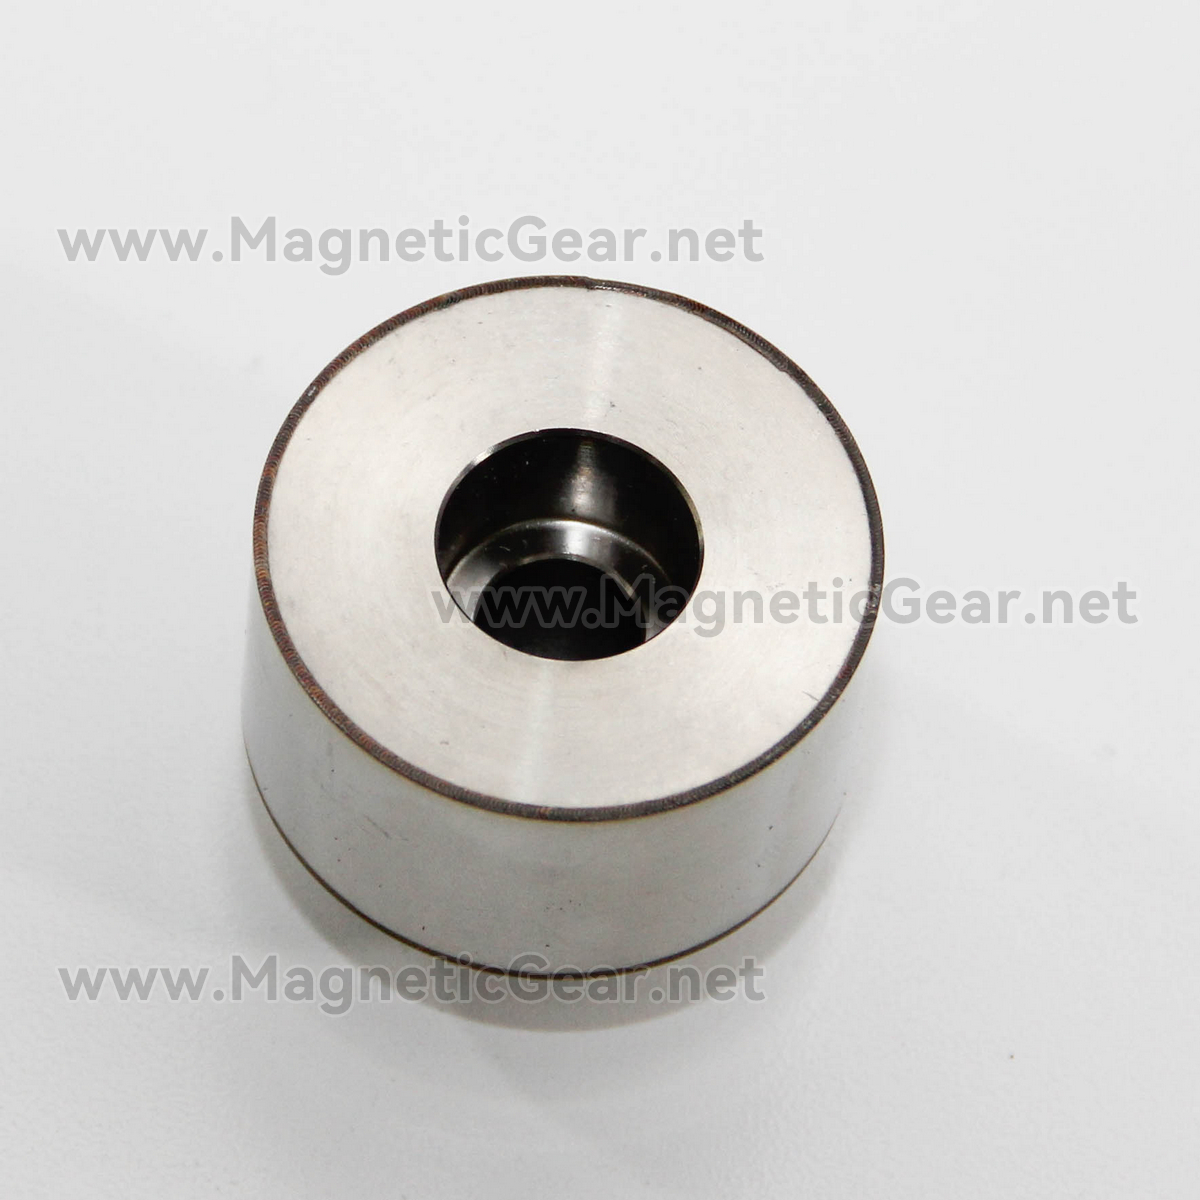 magnetic gear non-contact transmission neodymium